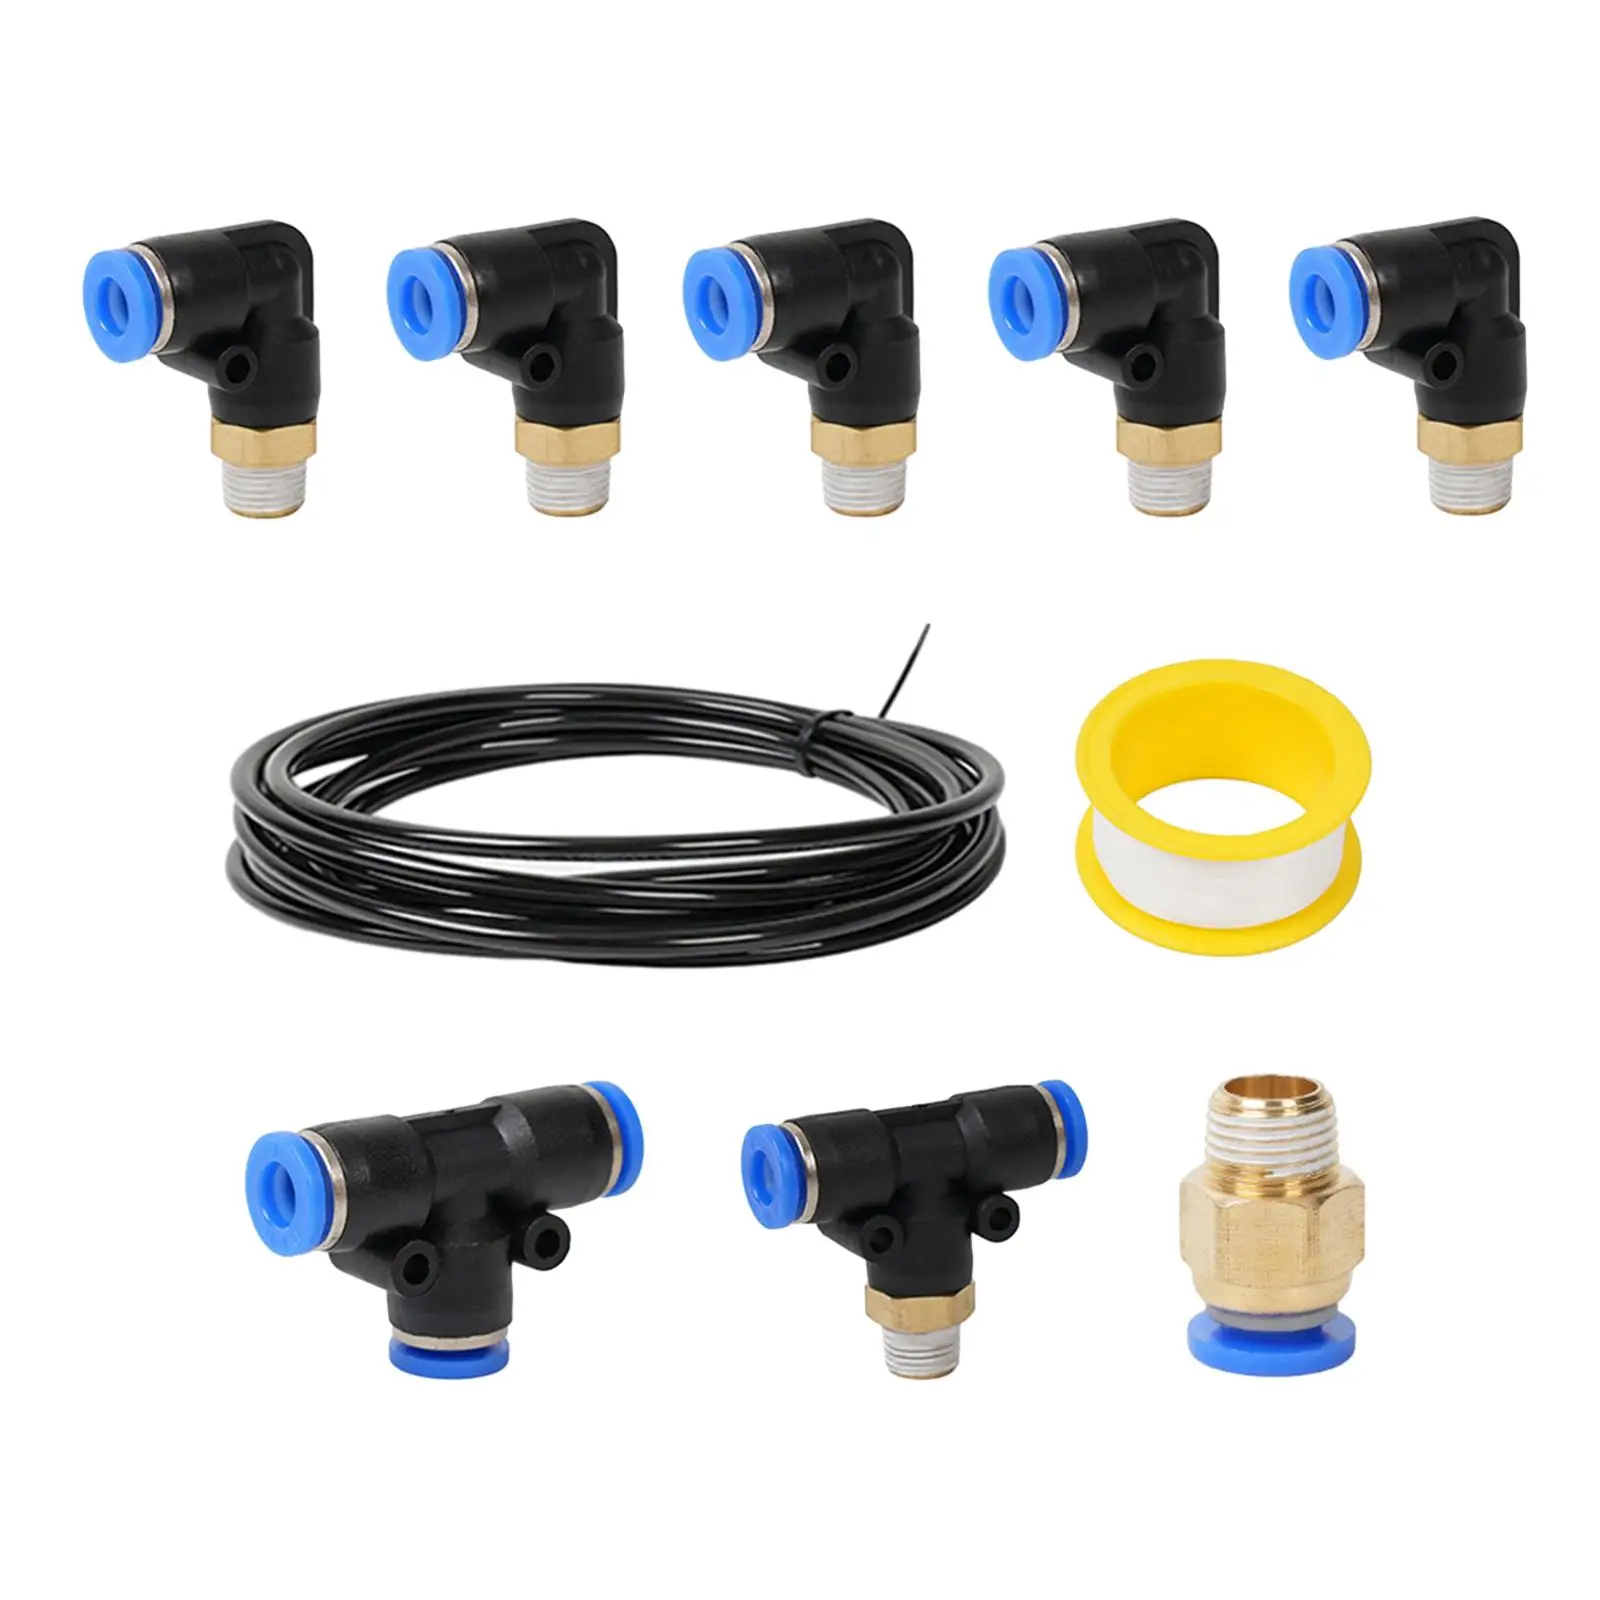 Wastegate and Solenoid Plug and Play High Temperature Resistance Car Accessories for Vehicles Vehicle Spare Parts Durable